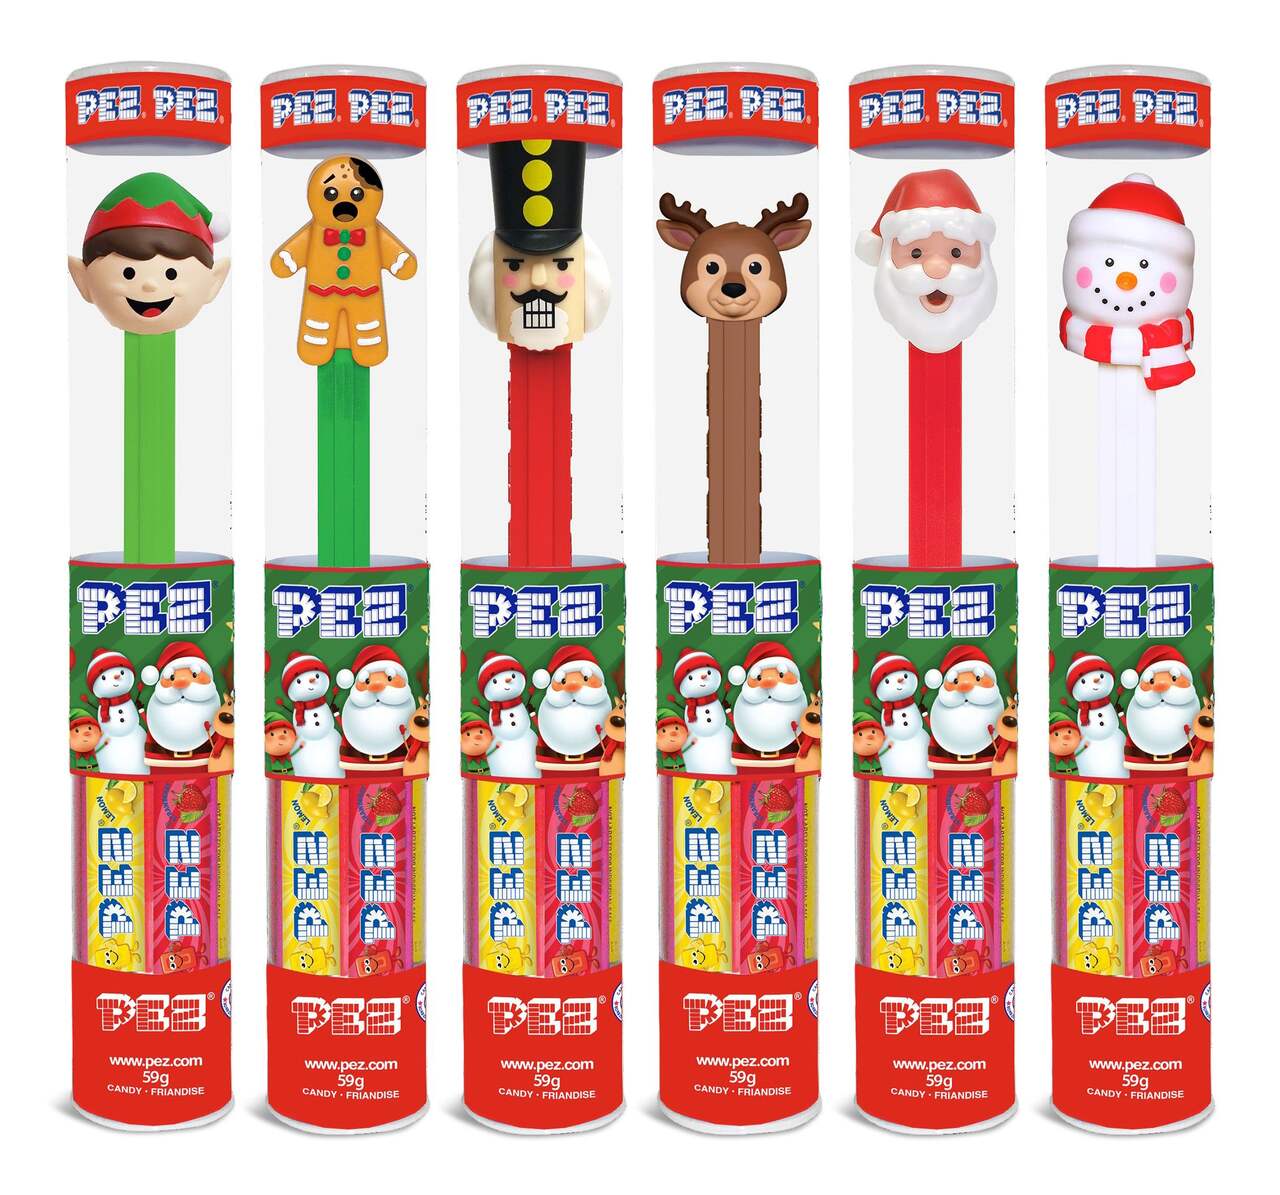 Pez Candy & Dispenser Christmas - Case of 12